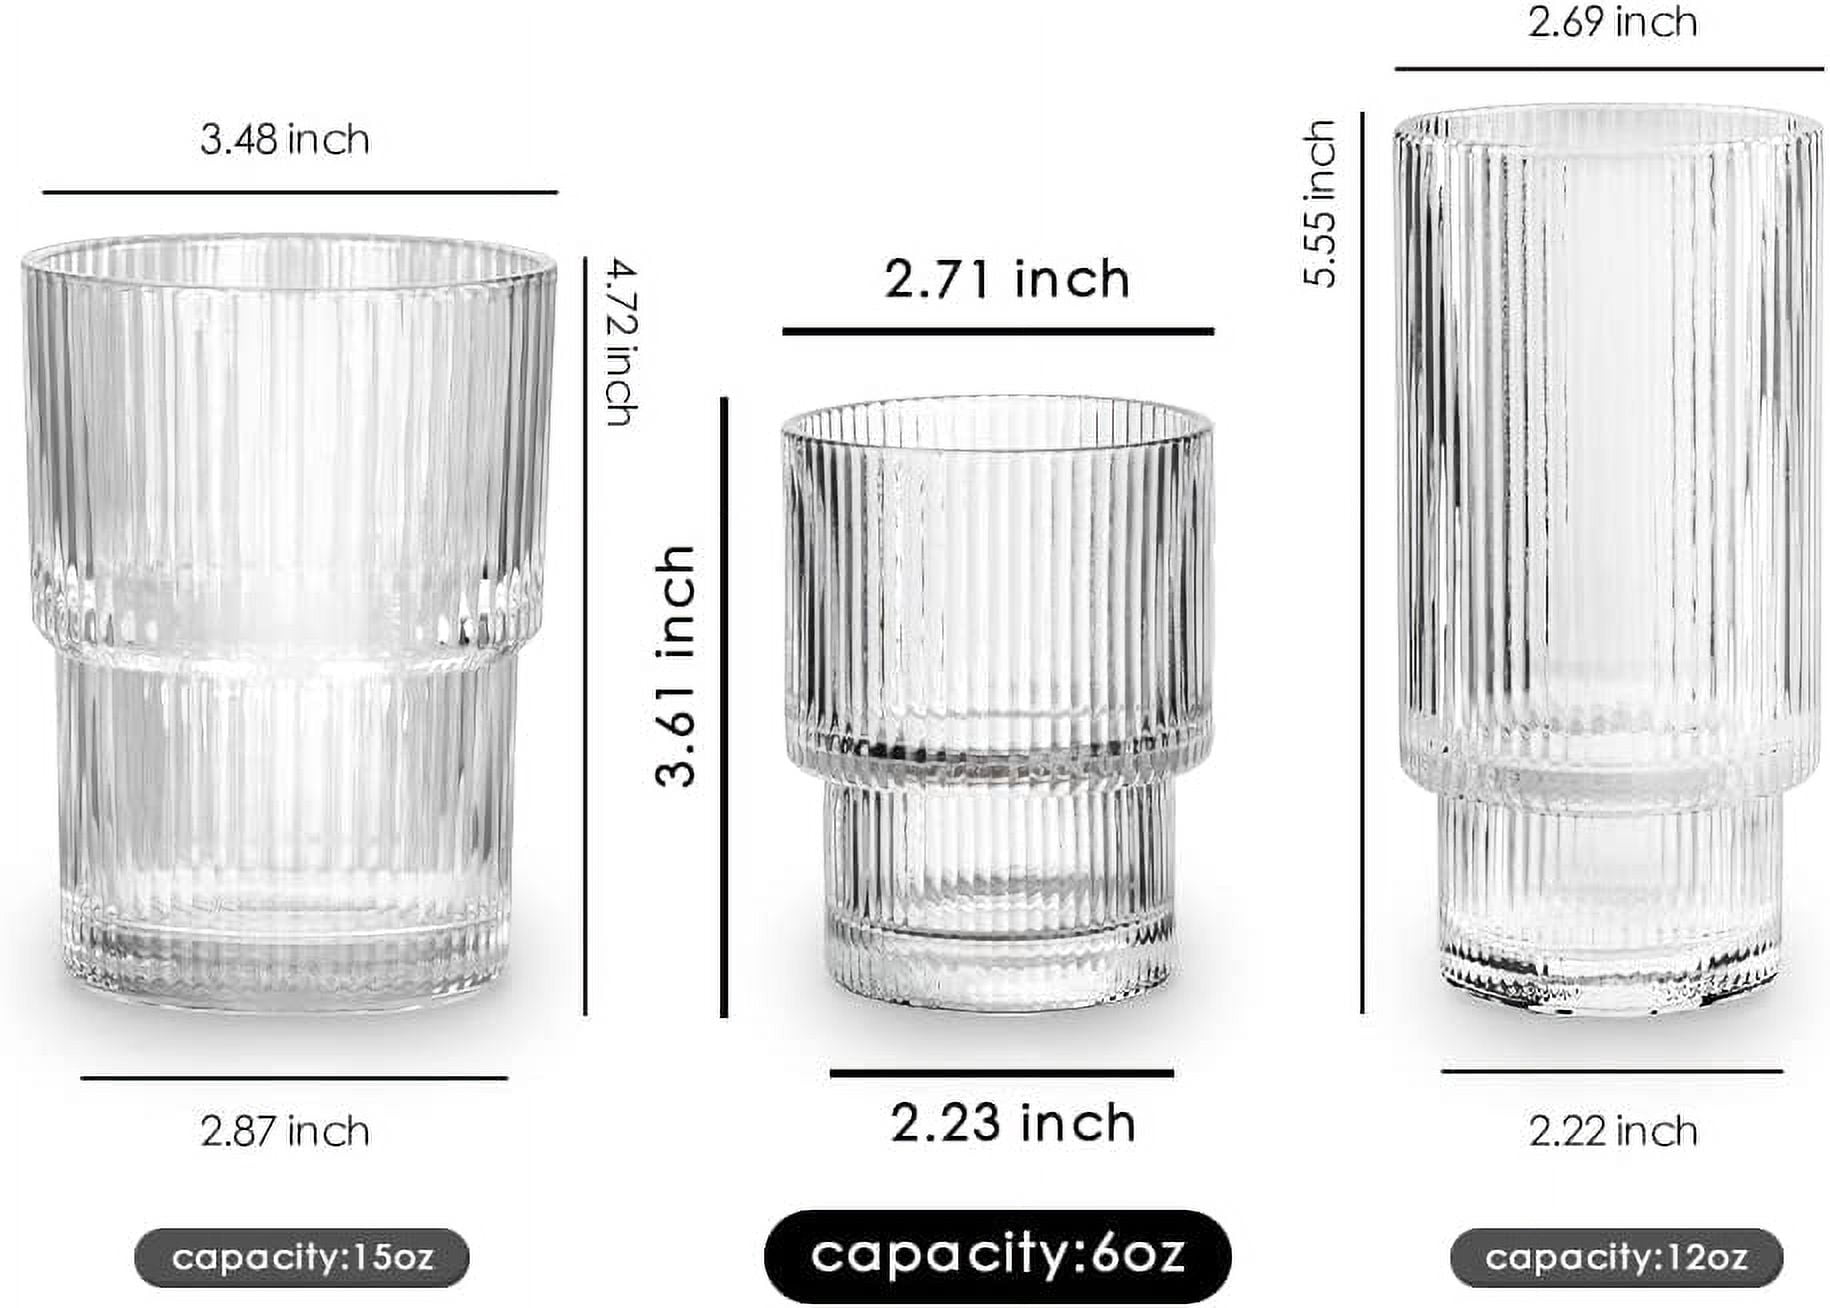 Set of 12 - Drinking Glasses 16 oz Highball Water Glasses Cups Sets Pint  Glasses Beer Glasses Tumble…See more Set of 12 - Drinking Glasses 16 oz